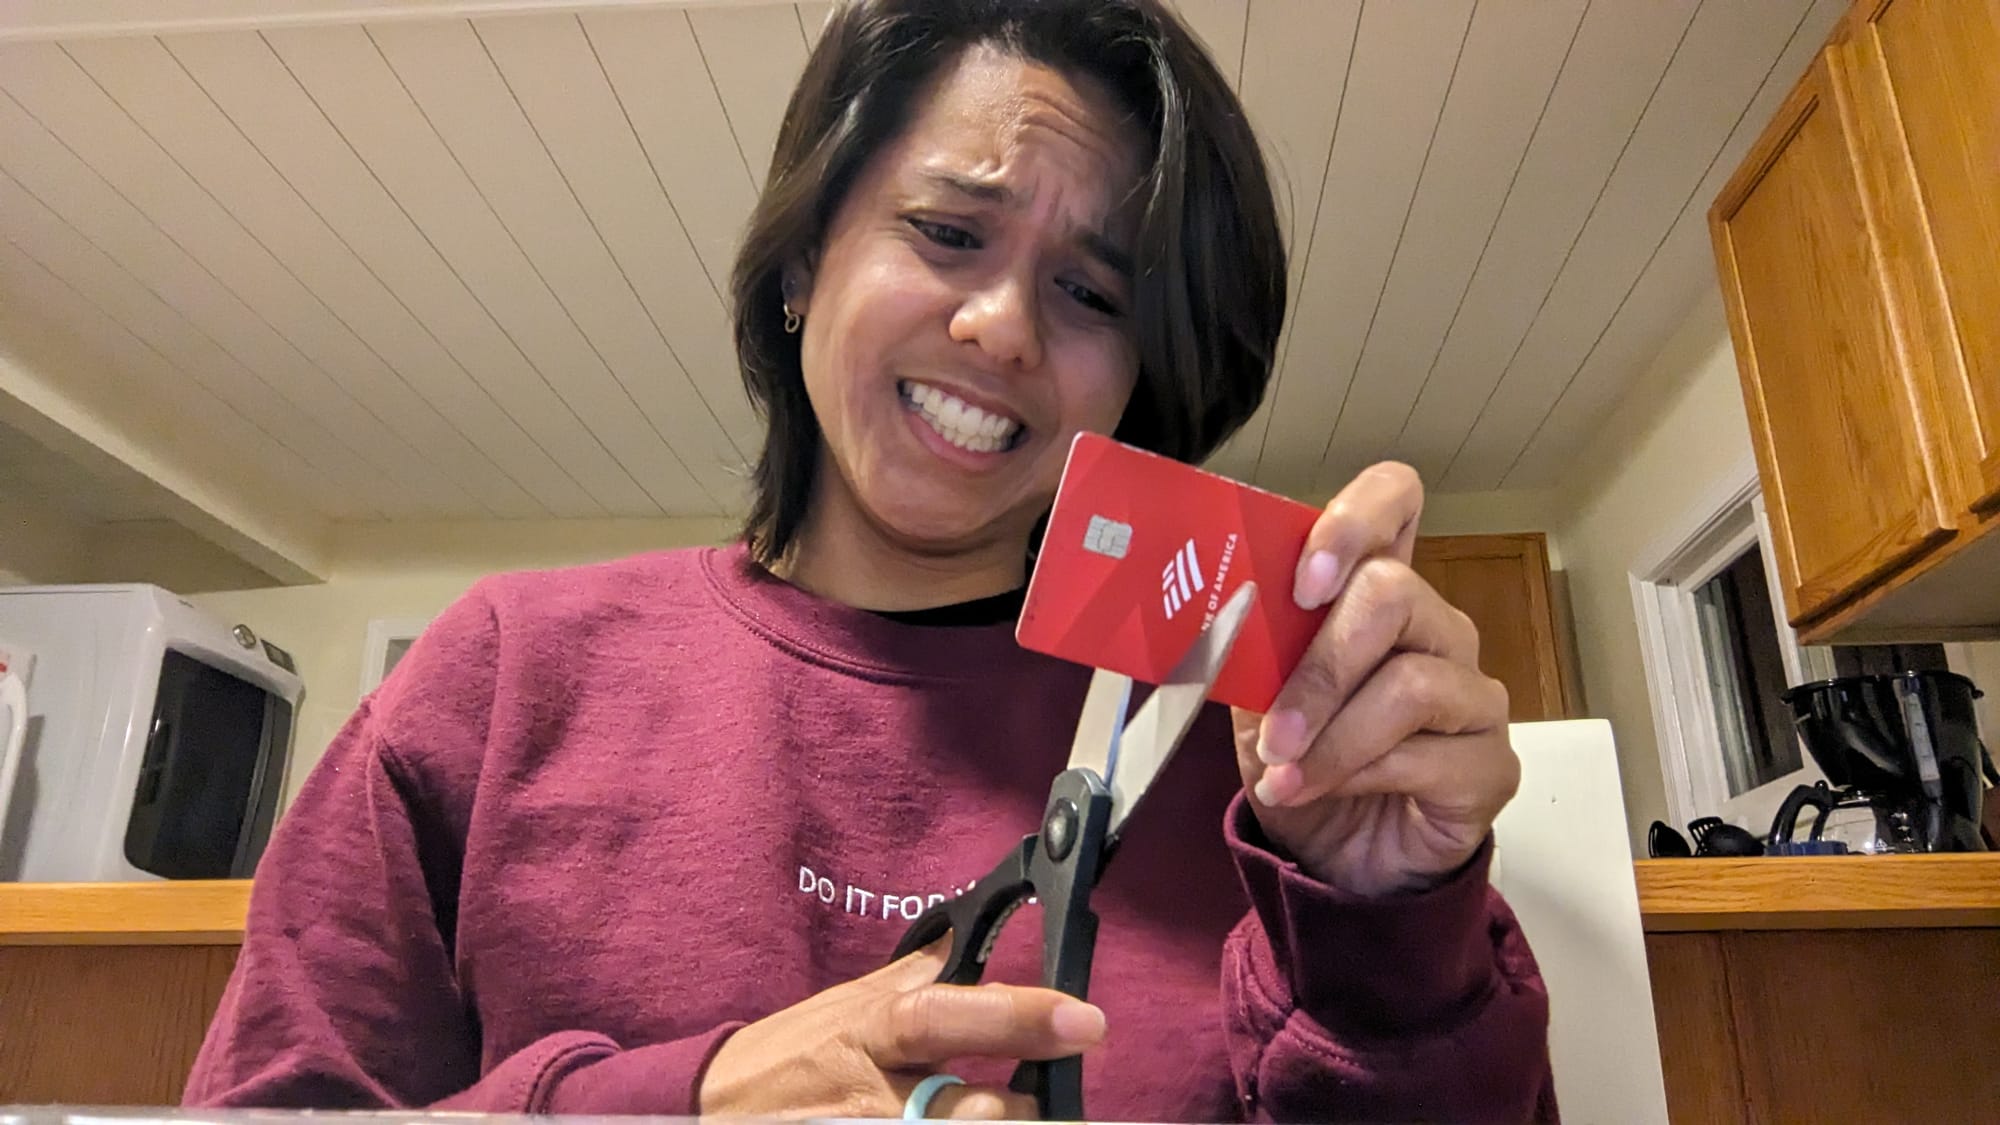 jemellee has a pair scissors about to cut her bank card in half